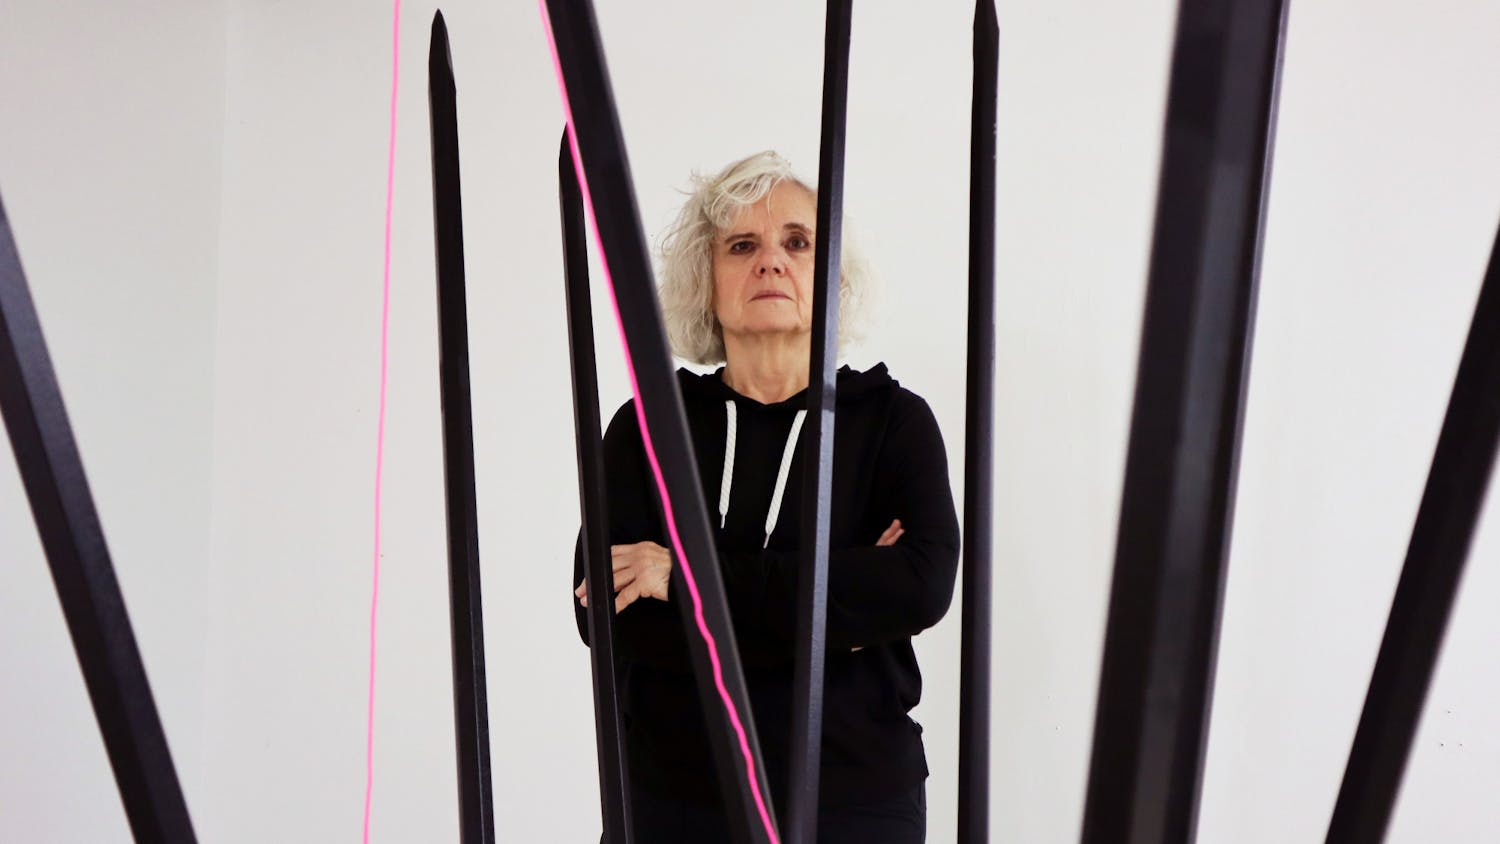 Charlotte Newman and her protest piece “Women’s Reproductive Health 2022,” which features nine steel knitting needles and a pink string representing the fragility of women’s rights in the Supreme Court’s hands Saturday, Nov. 19, 2022. 